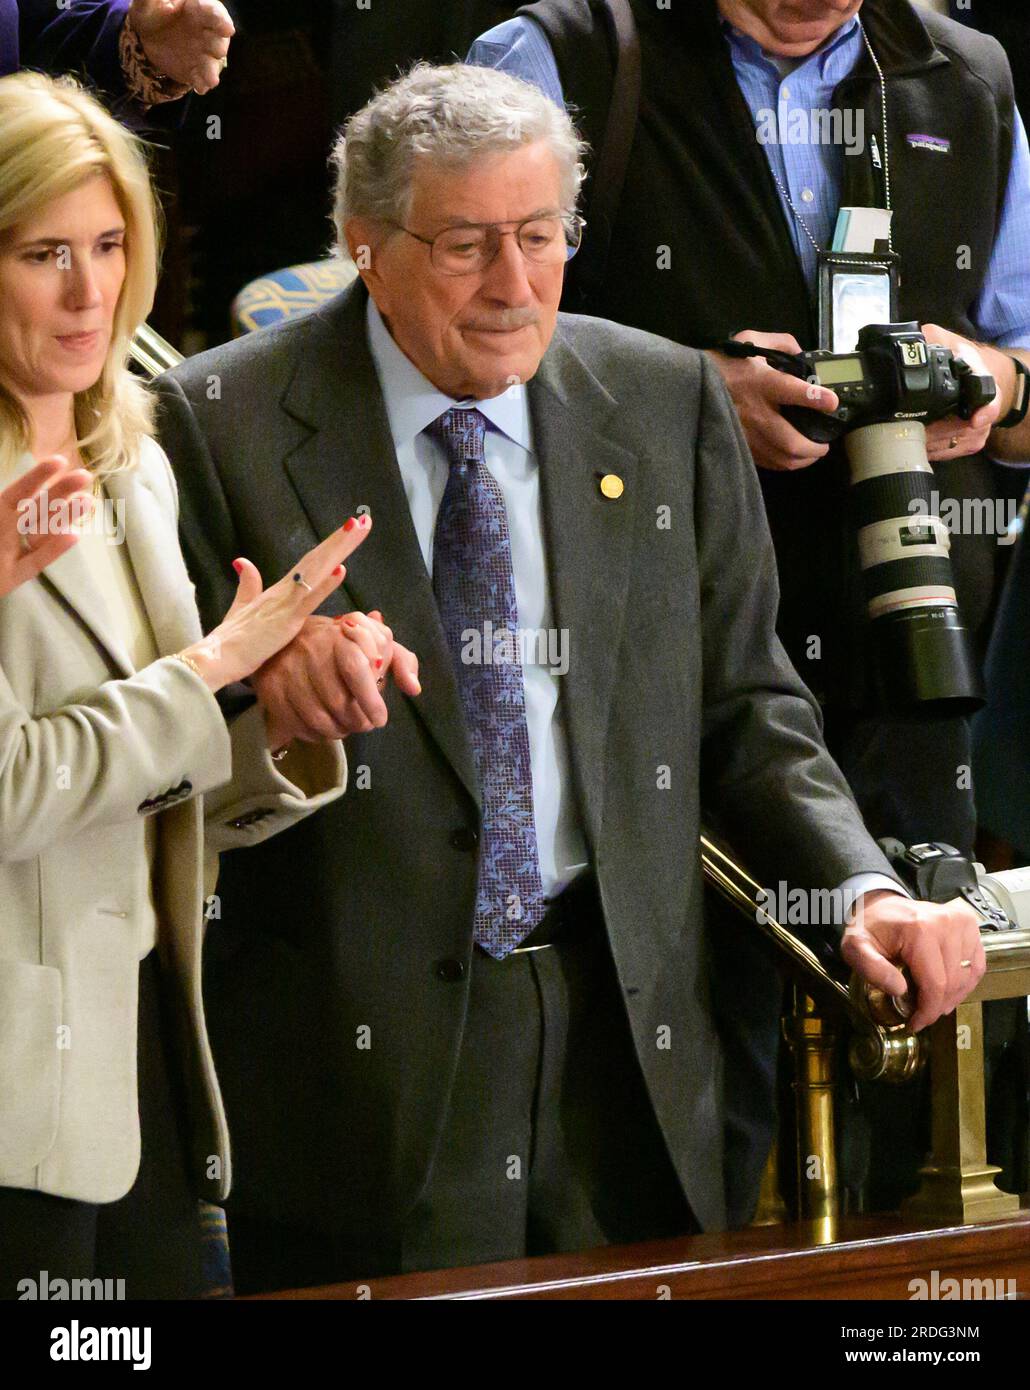 Singer Tony Bennett, a guest of Speaker of the United States House of Representatives Nancy Pelosi (Democrat of California), stands in the gallery as the 116th Congress convenes for its opening session in the US House Chamber of the US Capitol in Washington, DC on Thursday, January 3, 2019. Photo by Ron Sachs / CNP/ABACAPRESS.COM (RESTRICTION: NO New York or New Jersey Newspapers or newspapers within a 75 mile radius of New York City) Stock Photo